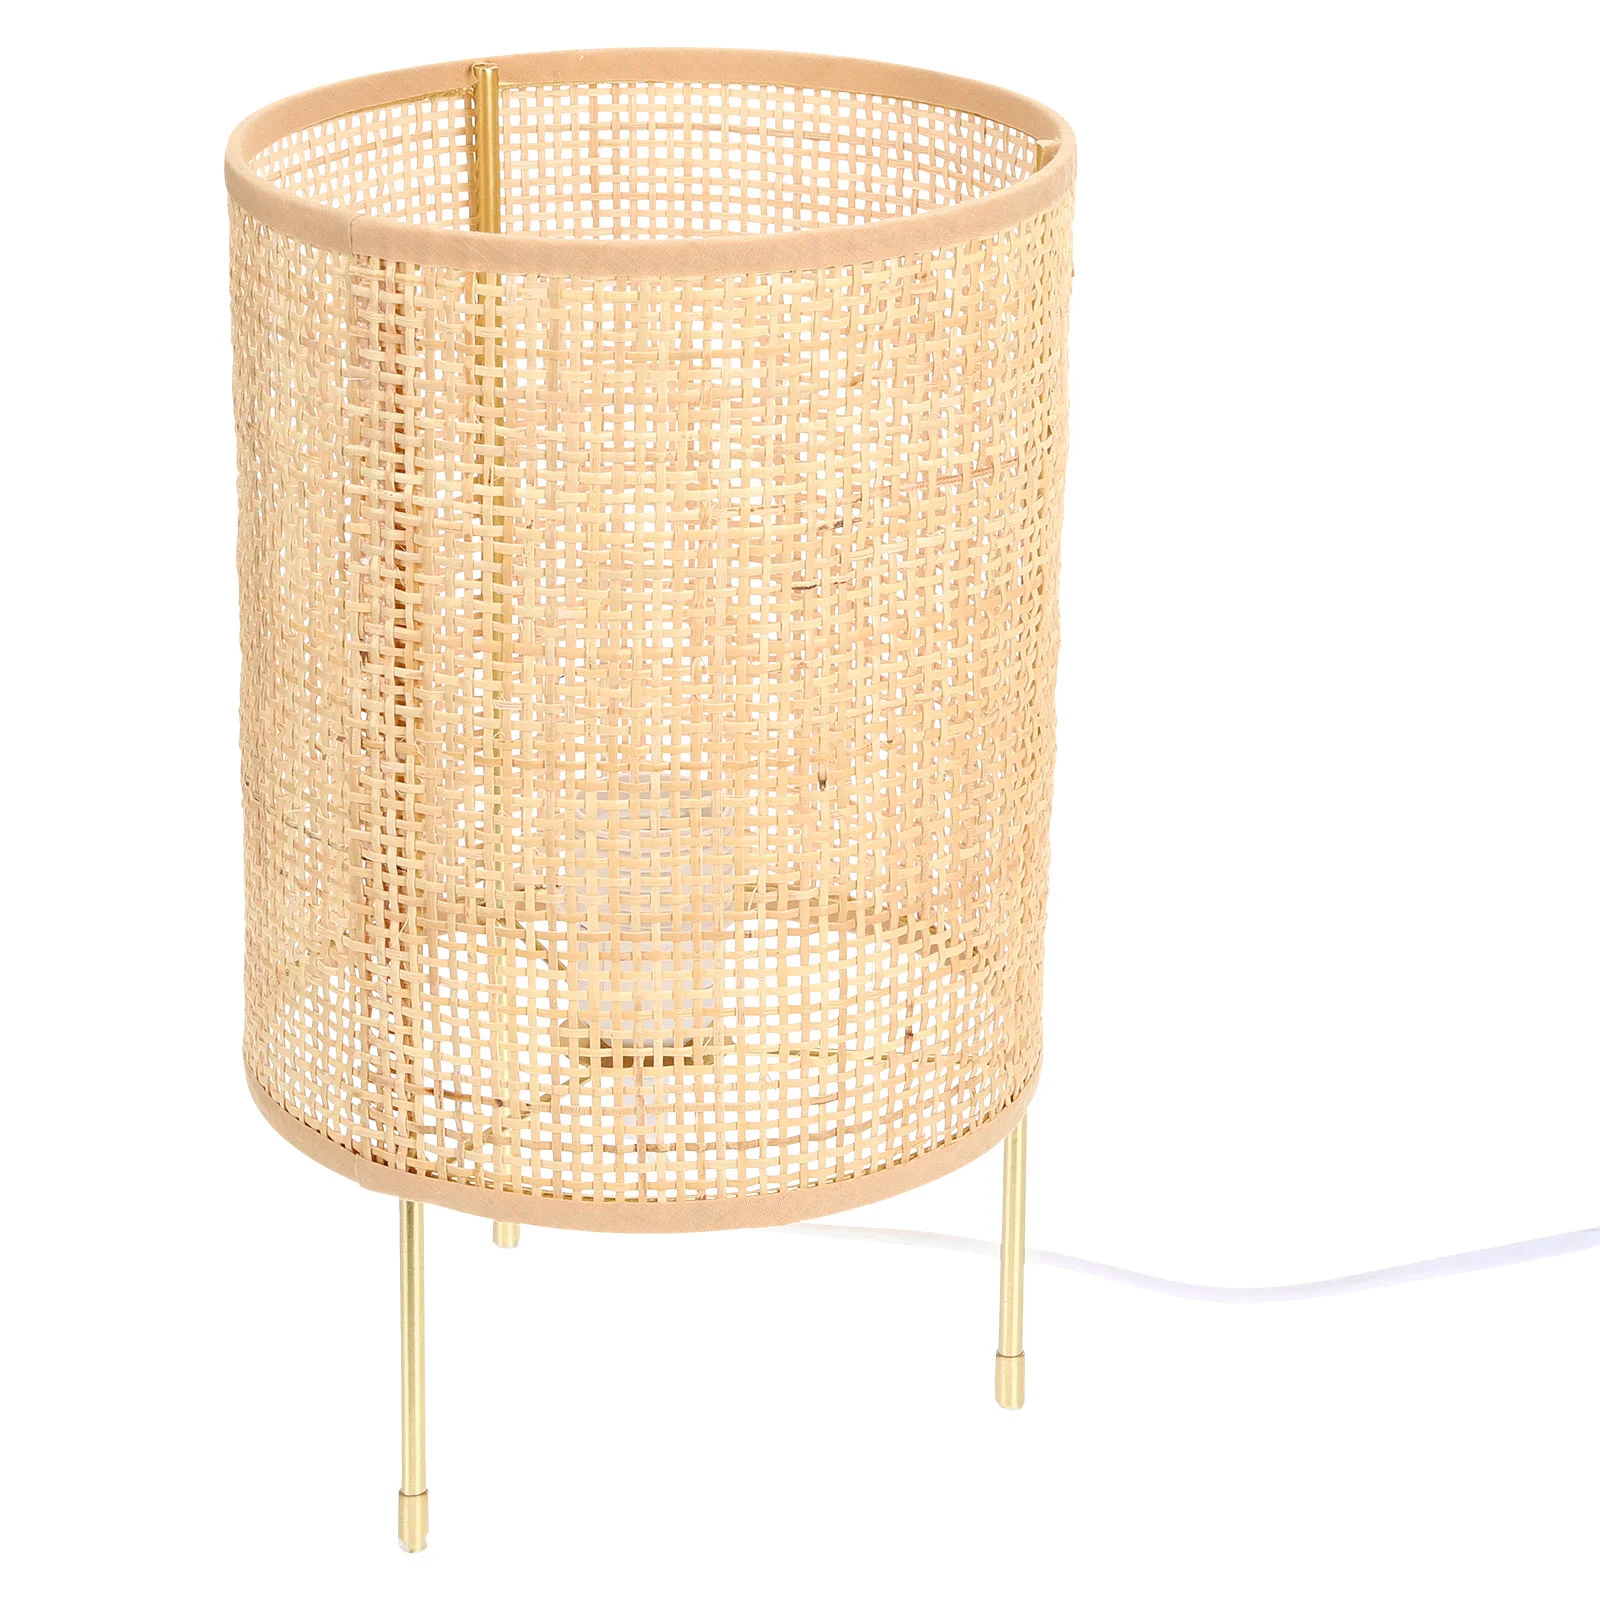 Nightstand Lamp Decorative Bedroom Bedside Table Decor Lighting Rattan Lamp Bedside Lamp Rattan Table Lamp Woven Table Lamp